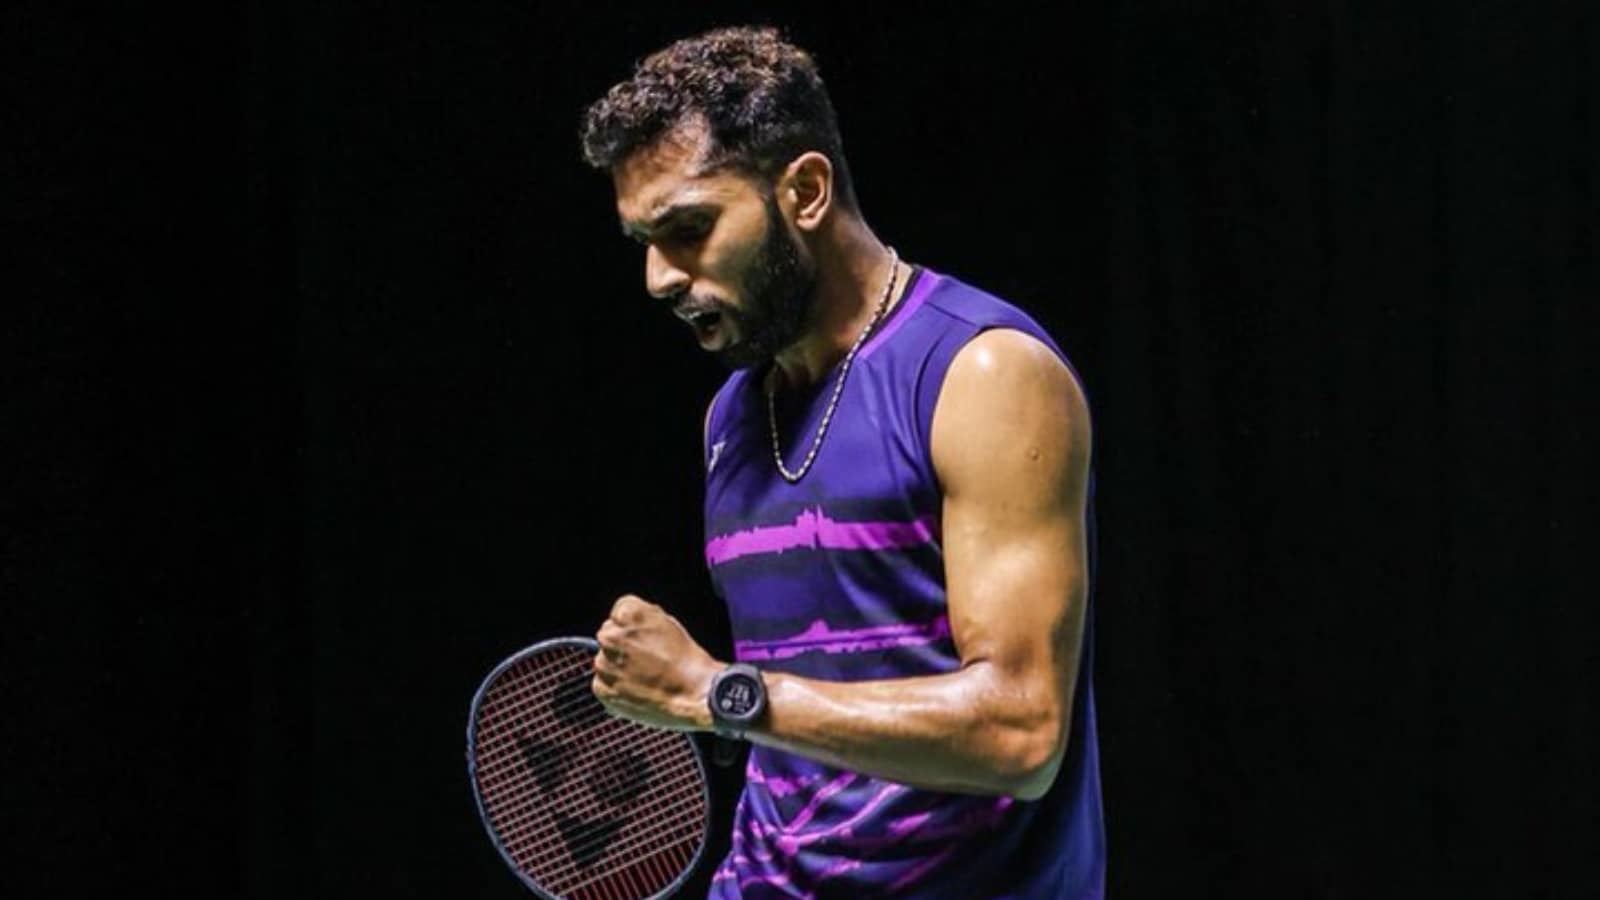 Battling Health Issues for 3 years, HS Prannoy Celebrates Gains at World Championships